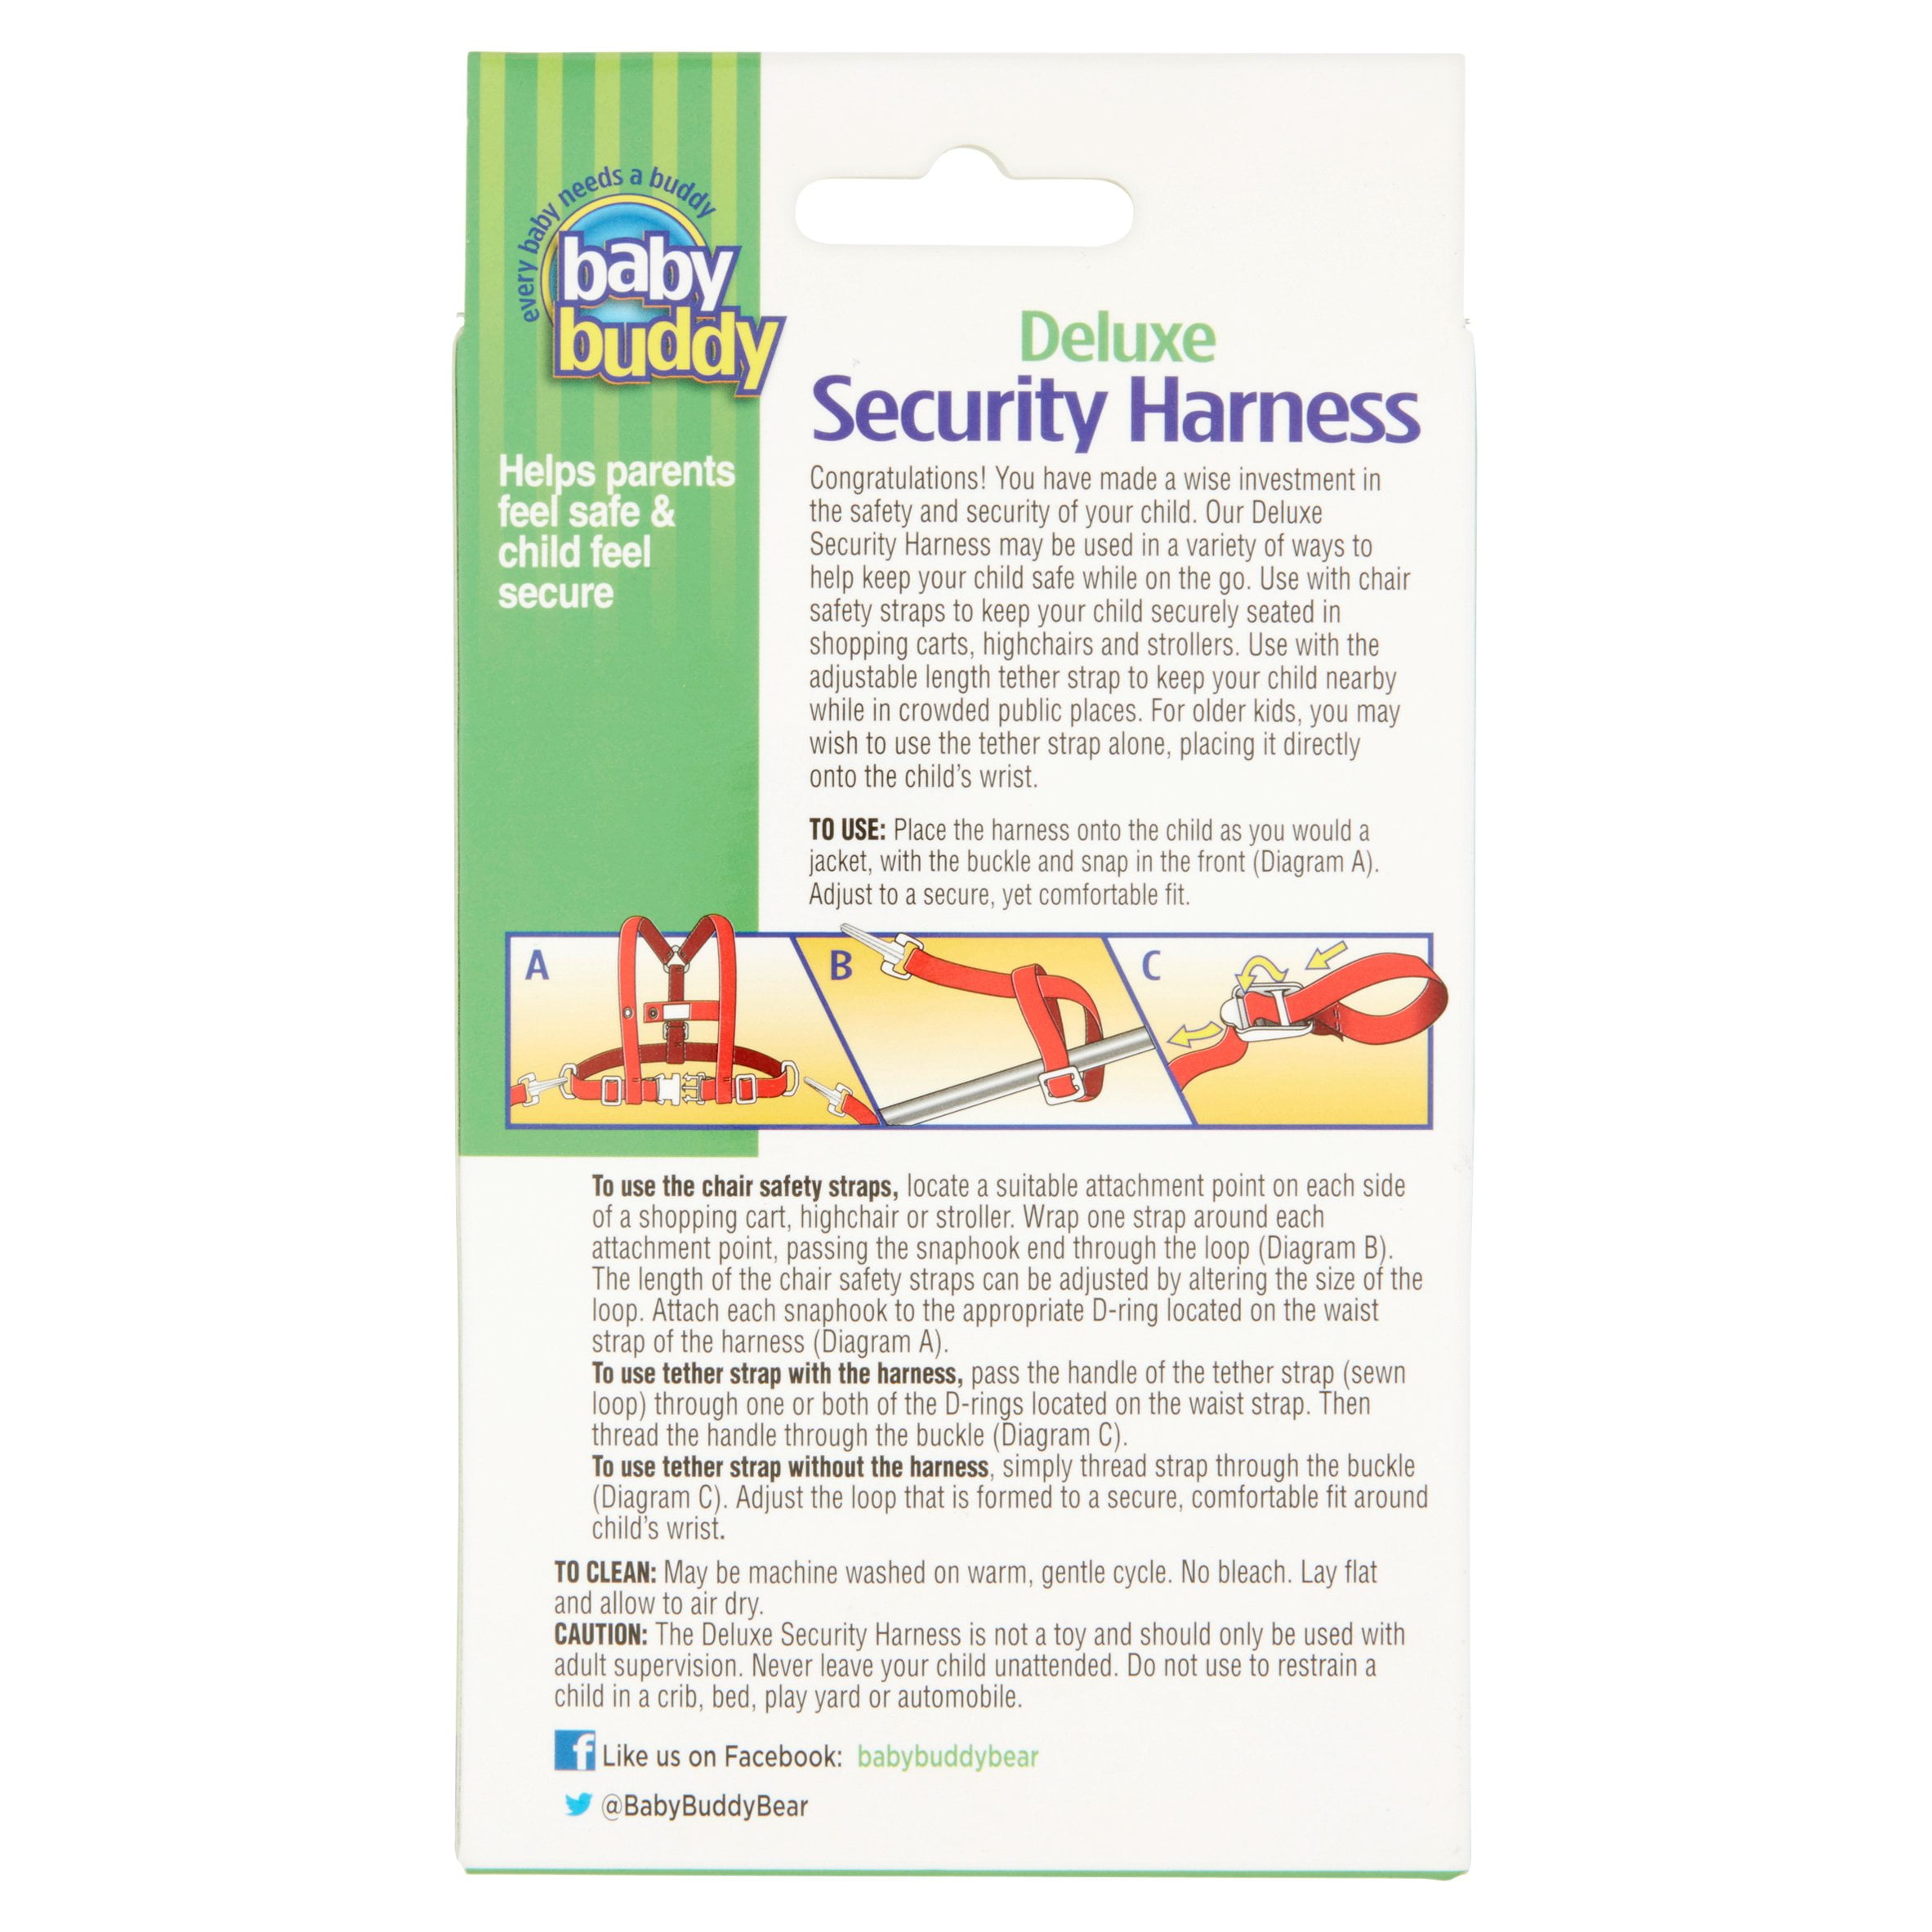 baby buddy deluxe security harness